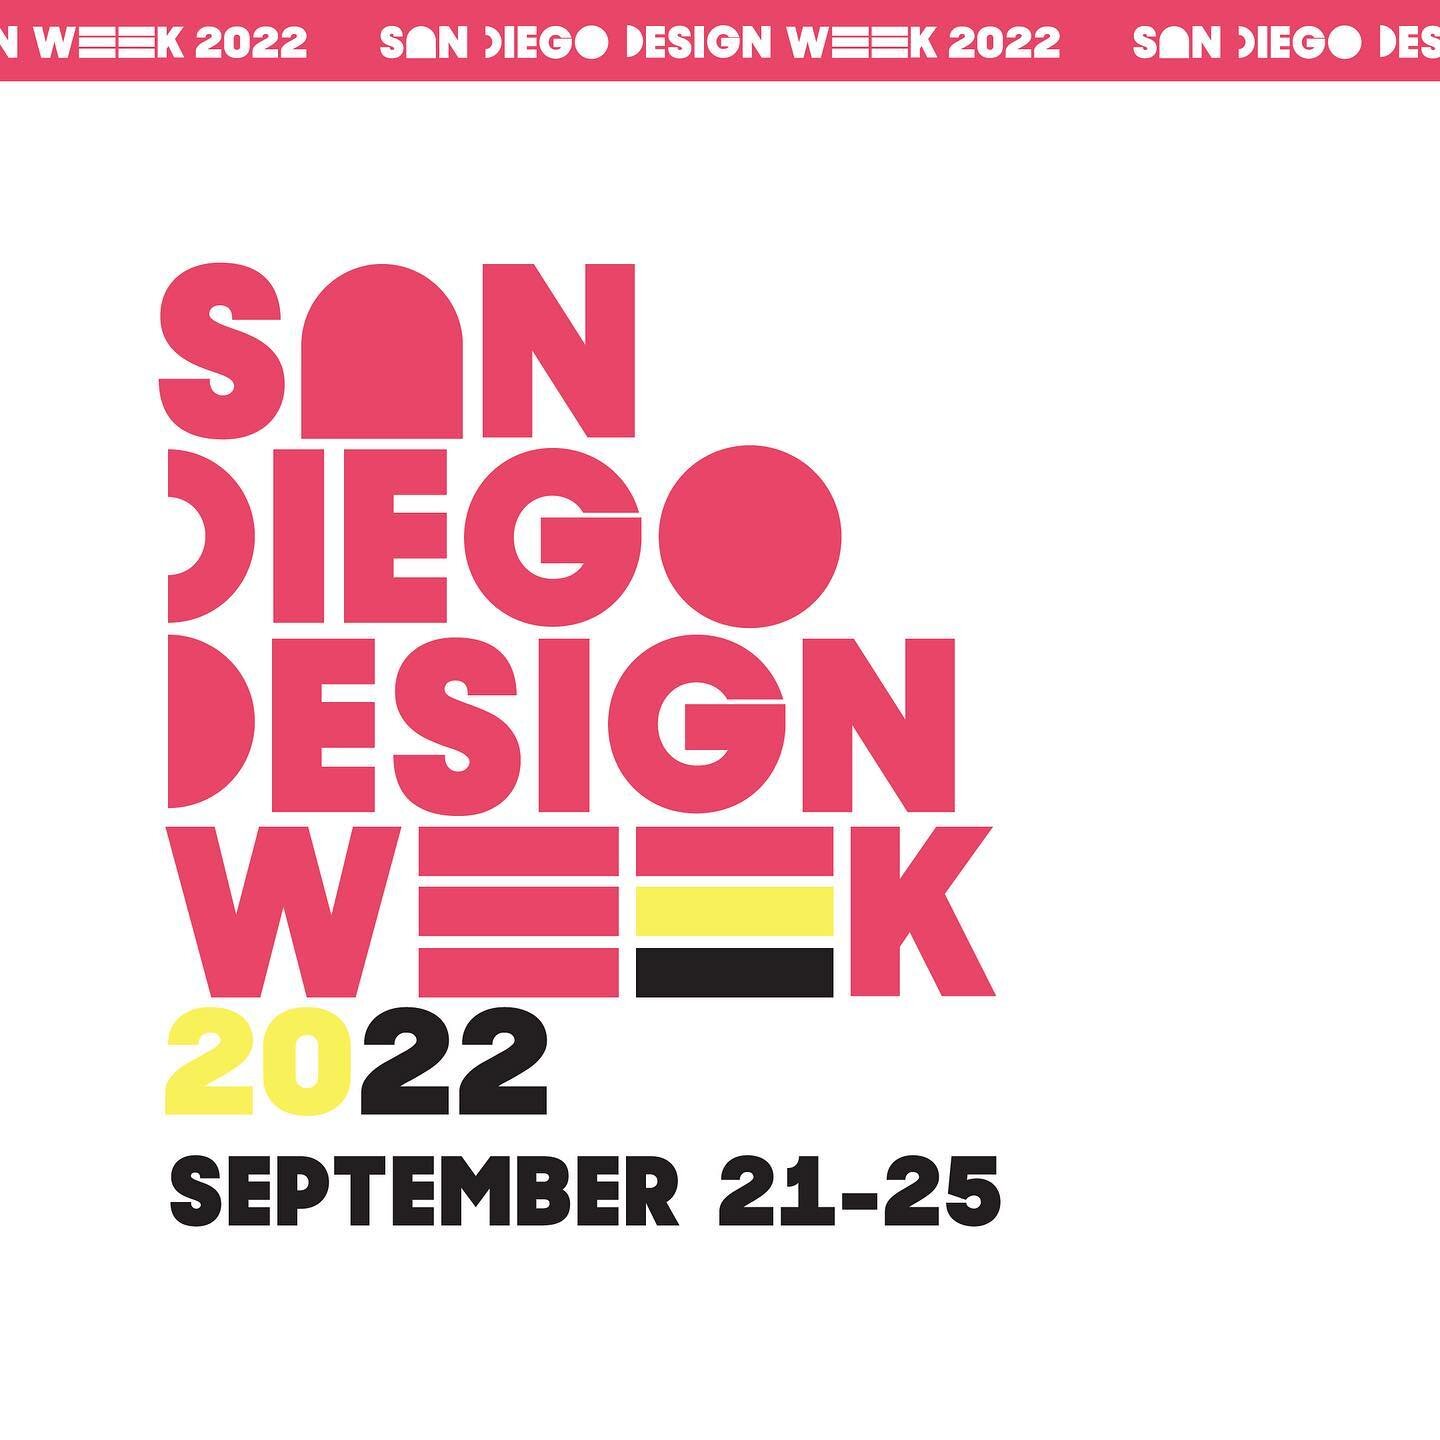 @sddesignweek (SDDW) presented by @mingeimuseum, is back September 21-25 for its annual five-day event celebrating design across the binational San Diego-Tijuana region. 🎉

WalknRollSD will present at design week, with a workshop + guided tour on Sa